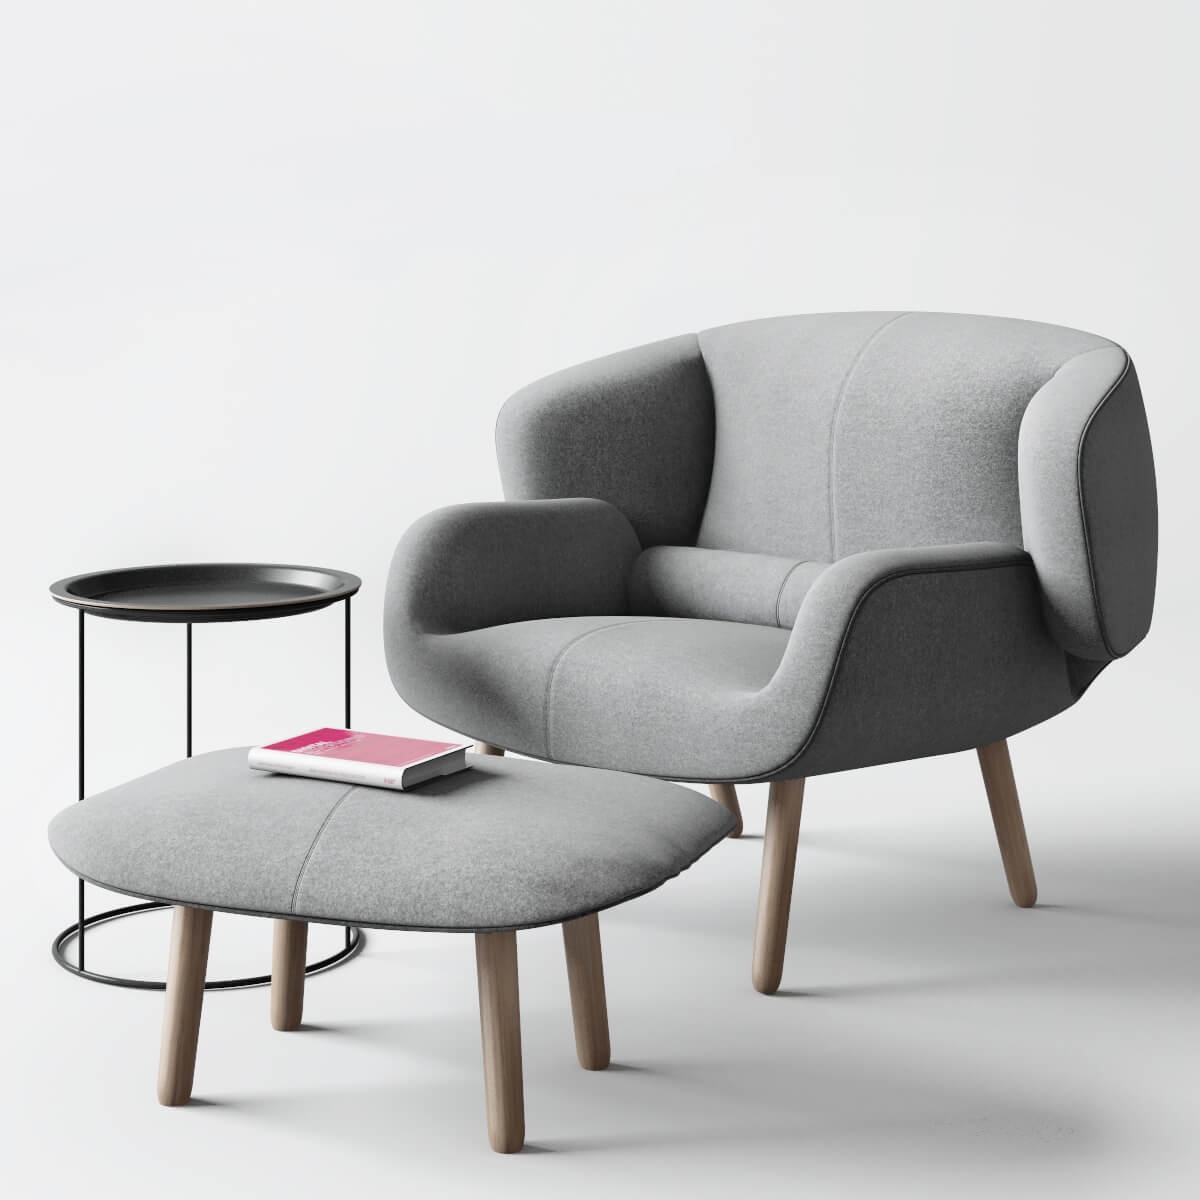 BoConcept - The fusion chair looking very cute together with the